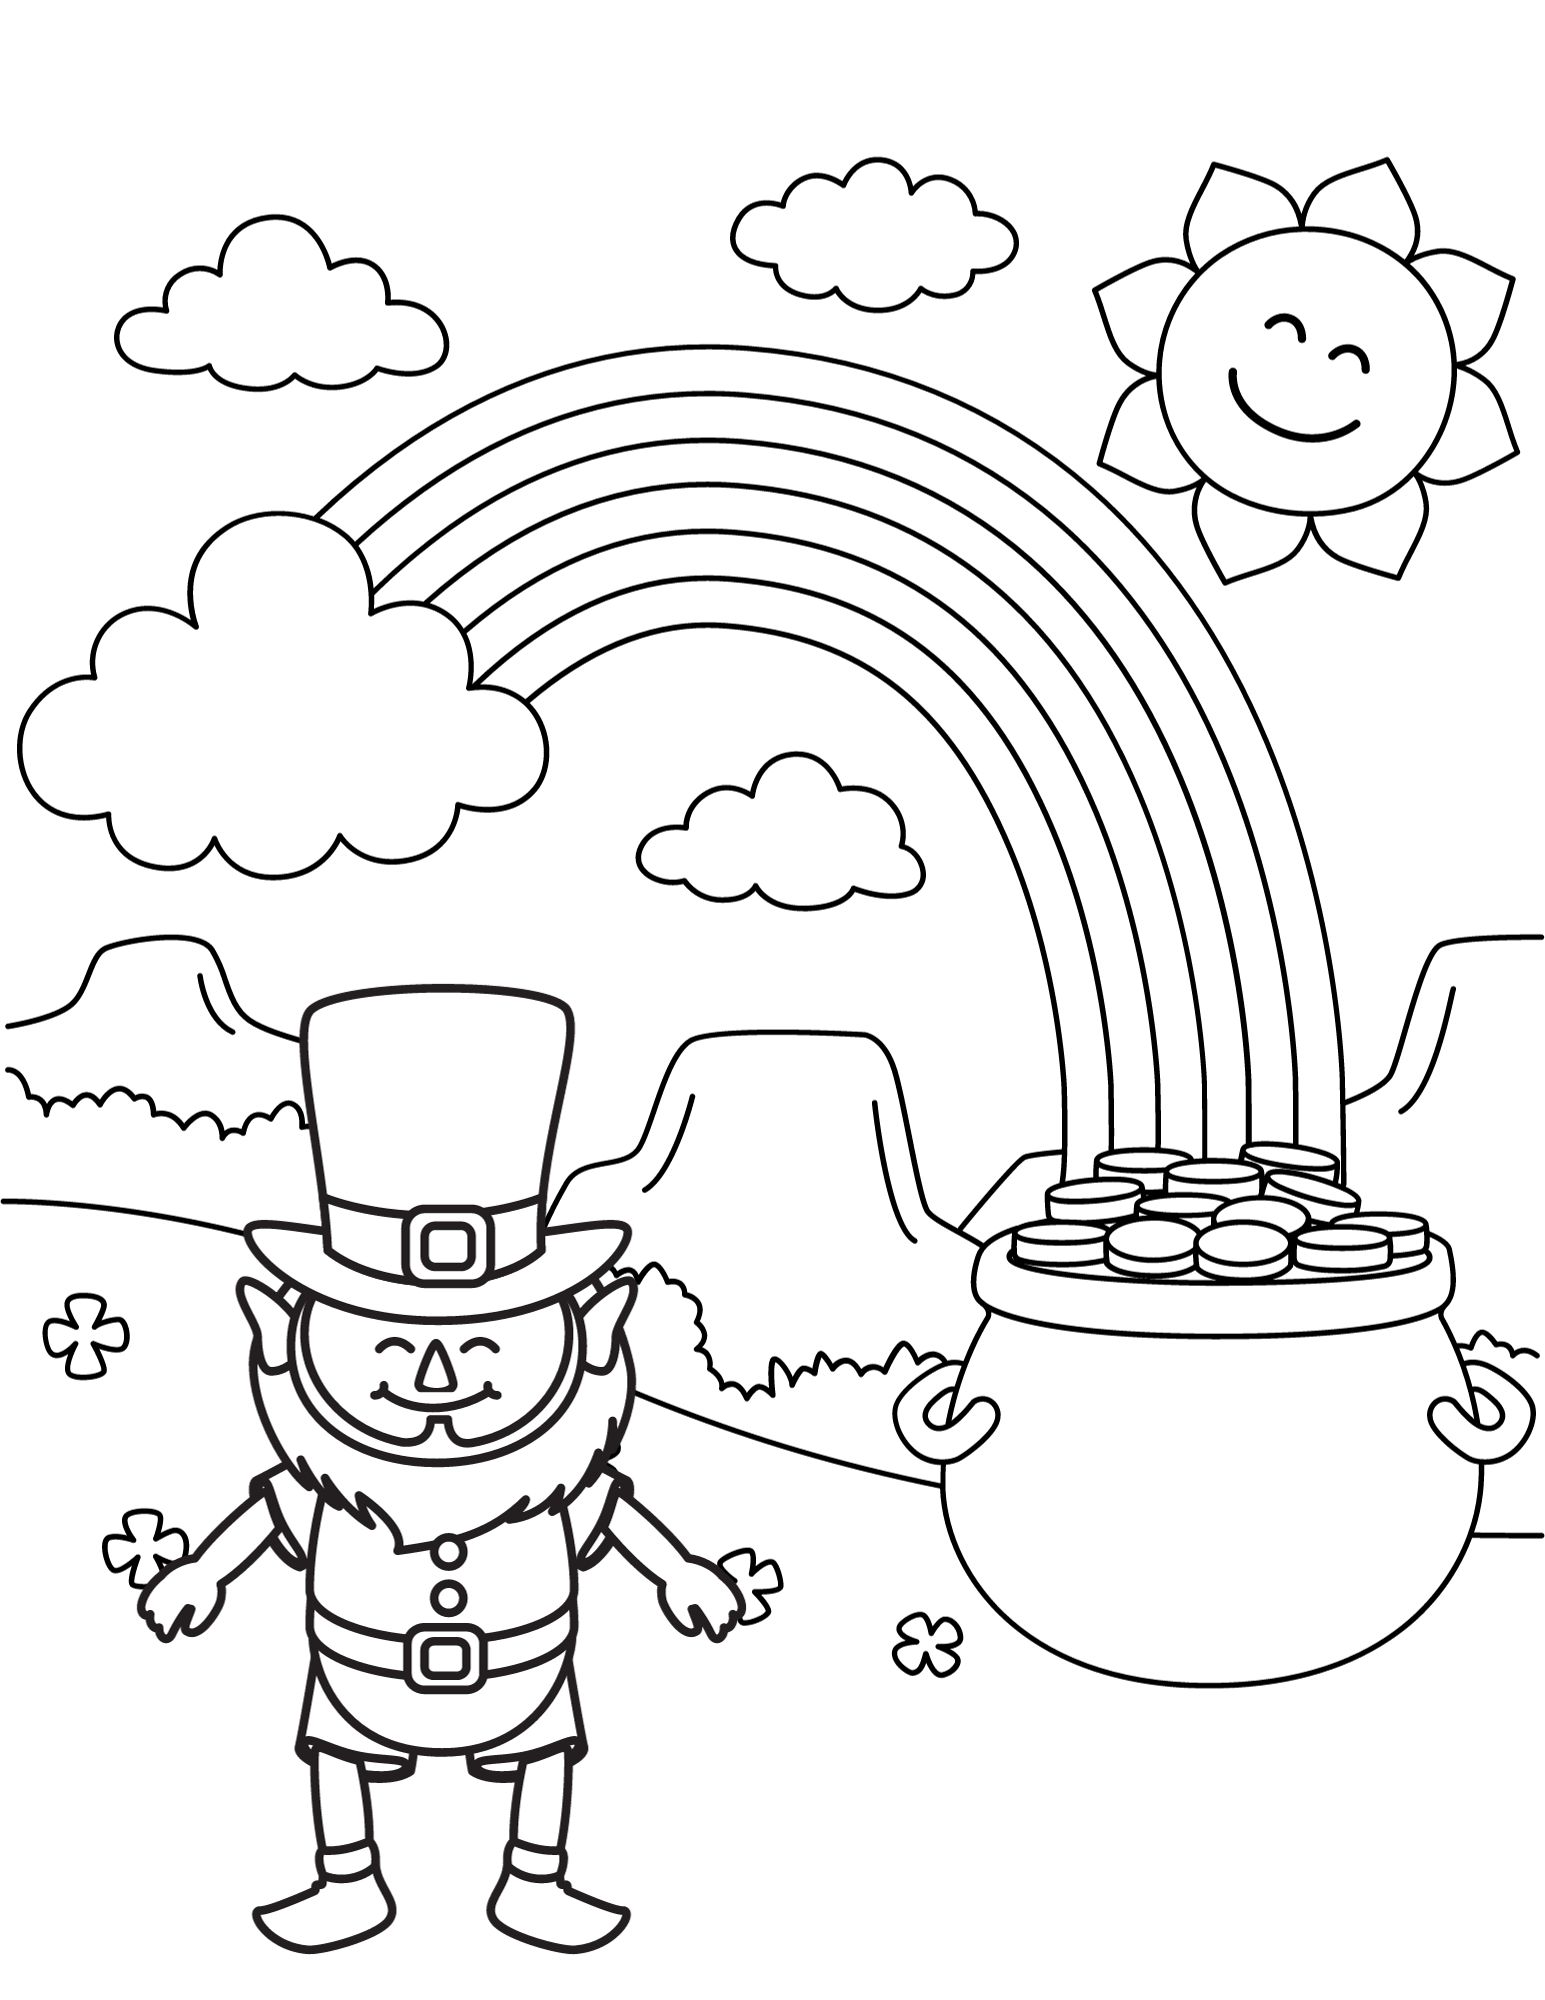 Free rainbow coloring pages to print